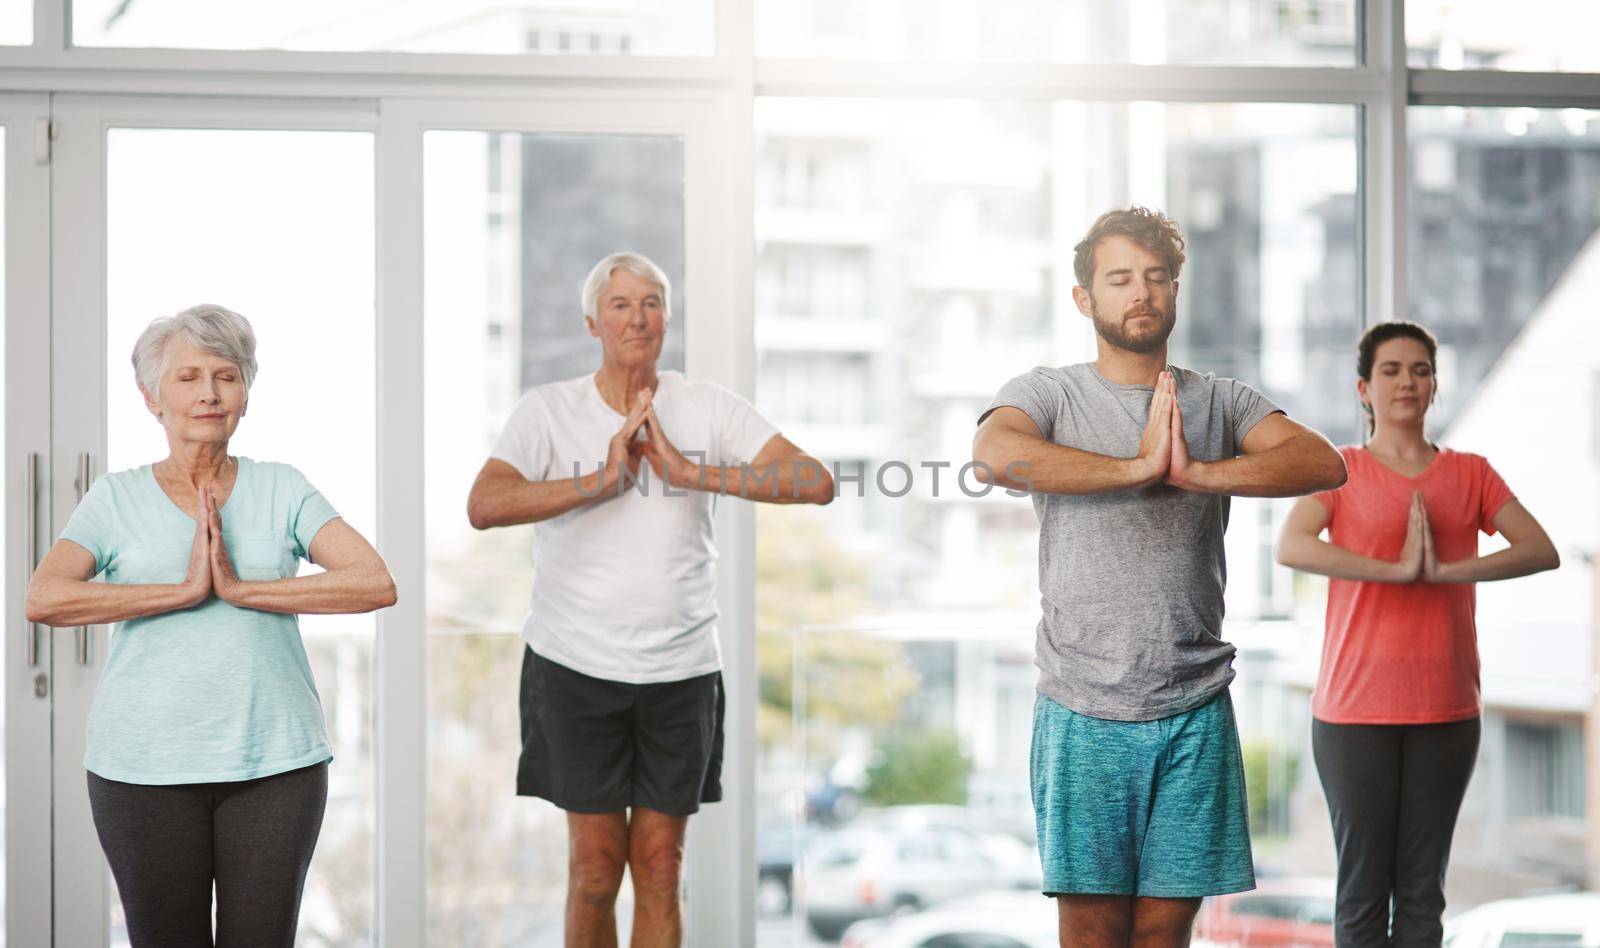 Finding their center. a group of people meditating while practicing yoga. by YuriArcurs